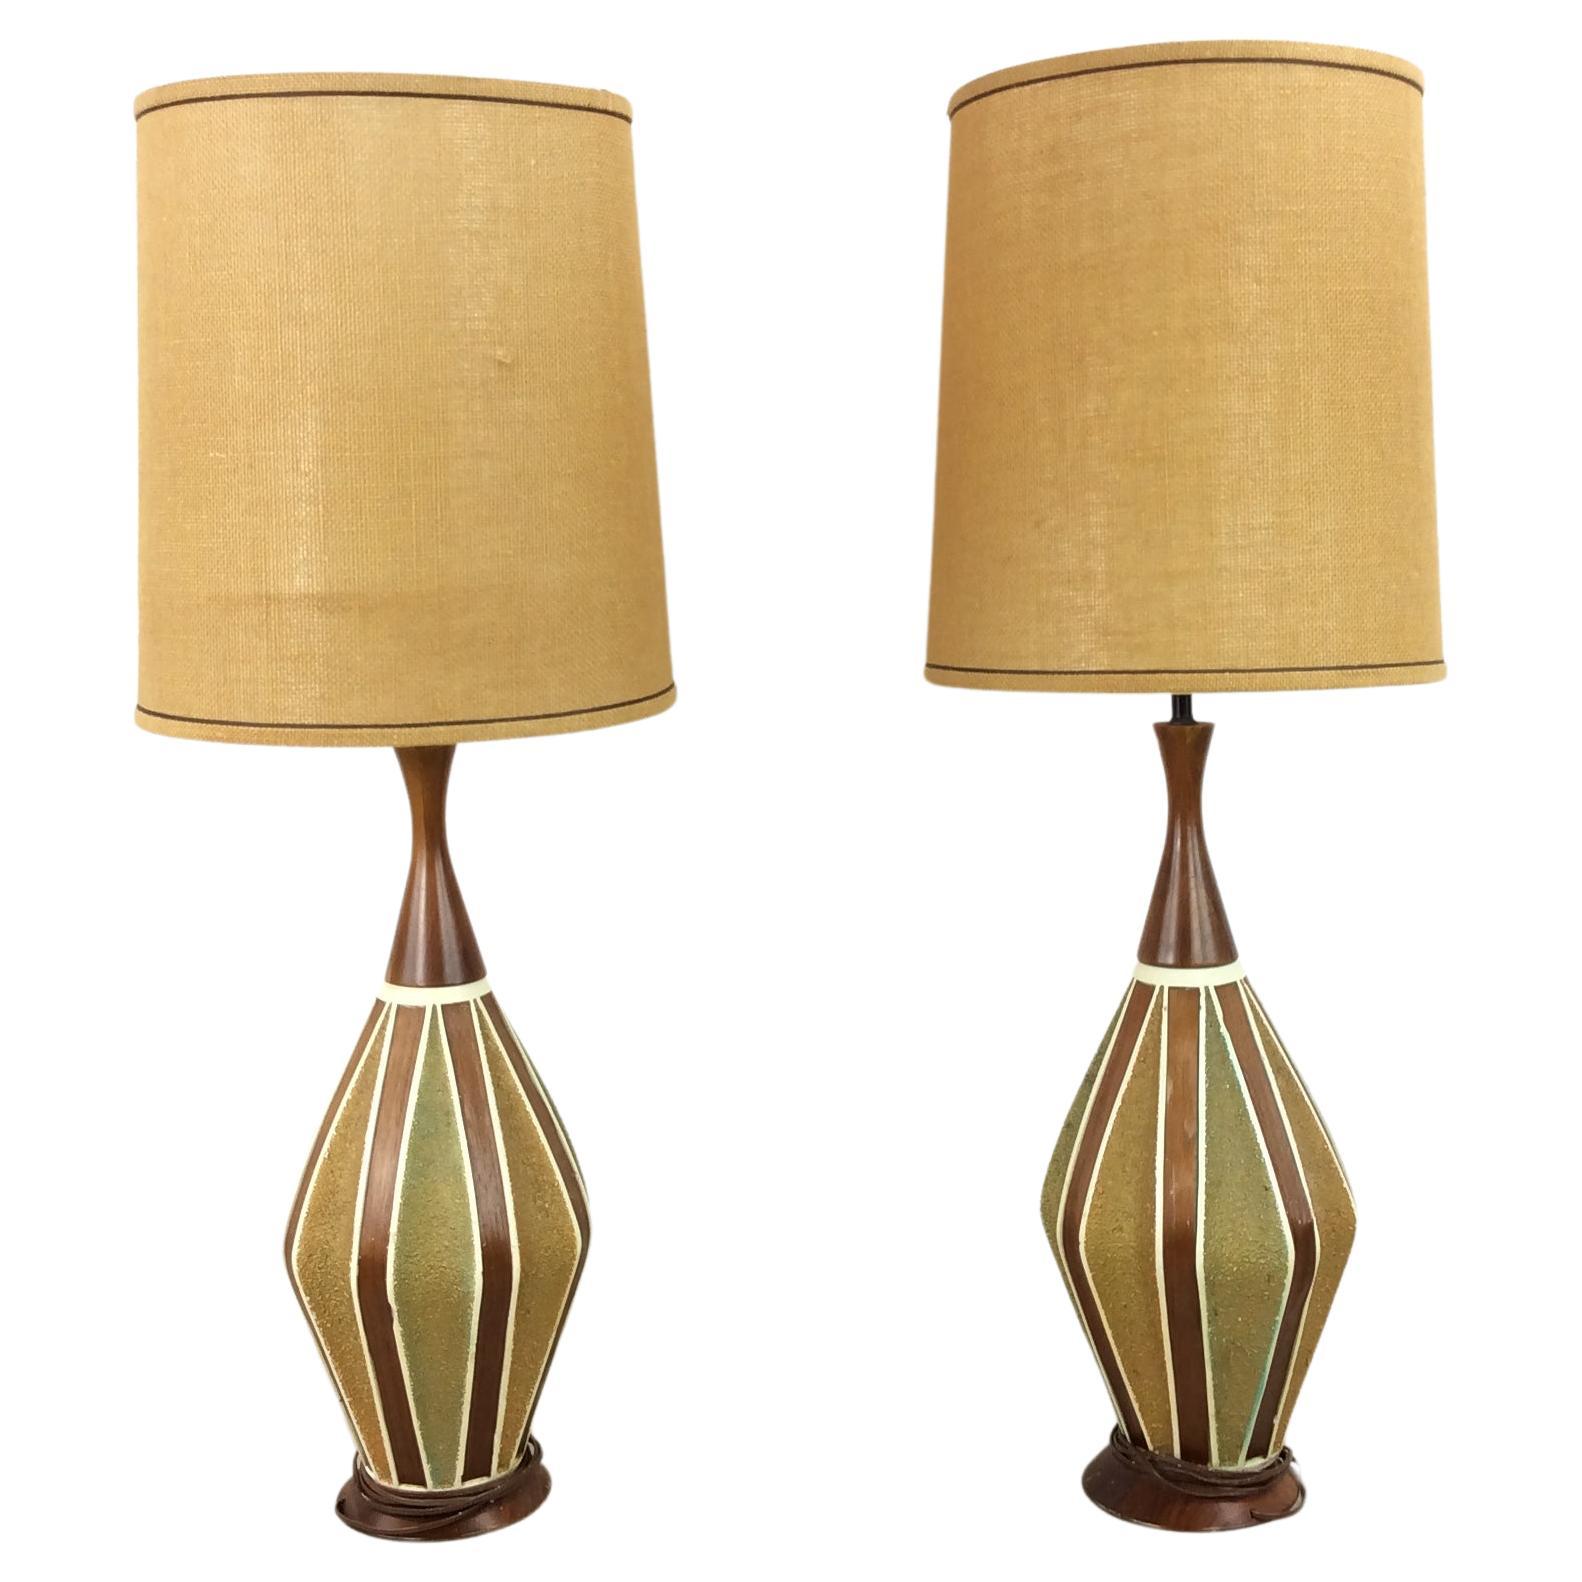 Pair of Mid Century Modern Ceramic Table Lamps with Barrel Shade For Sale